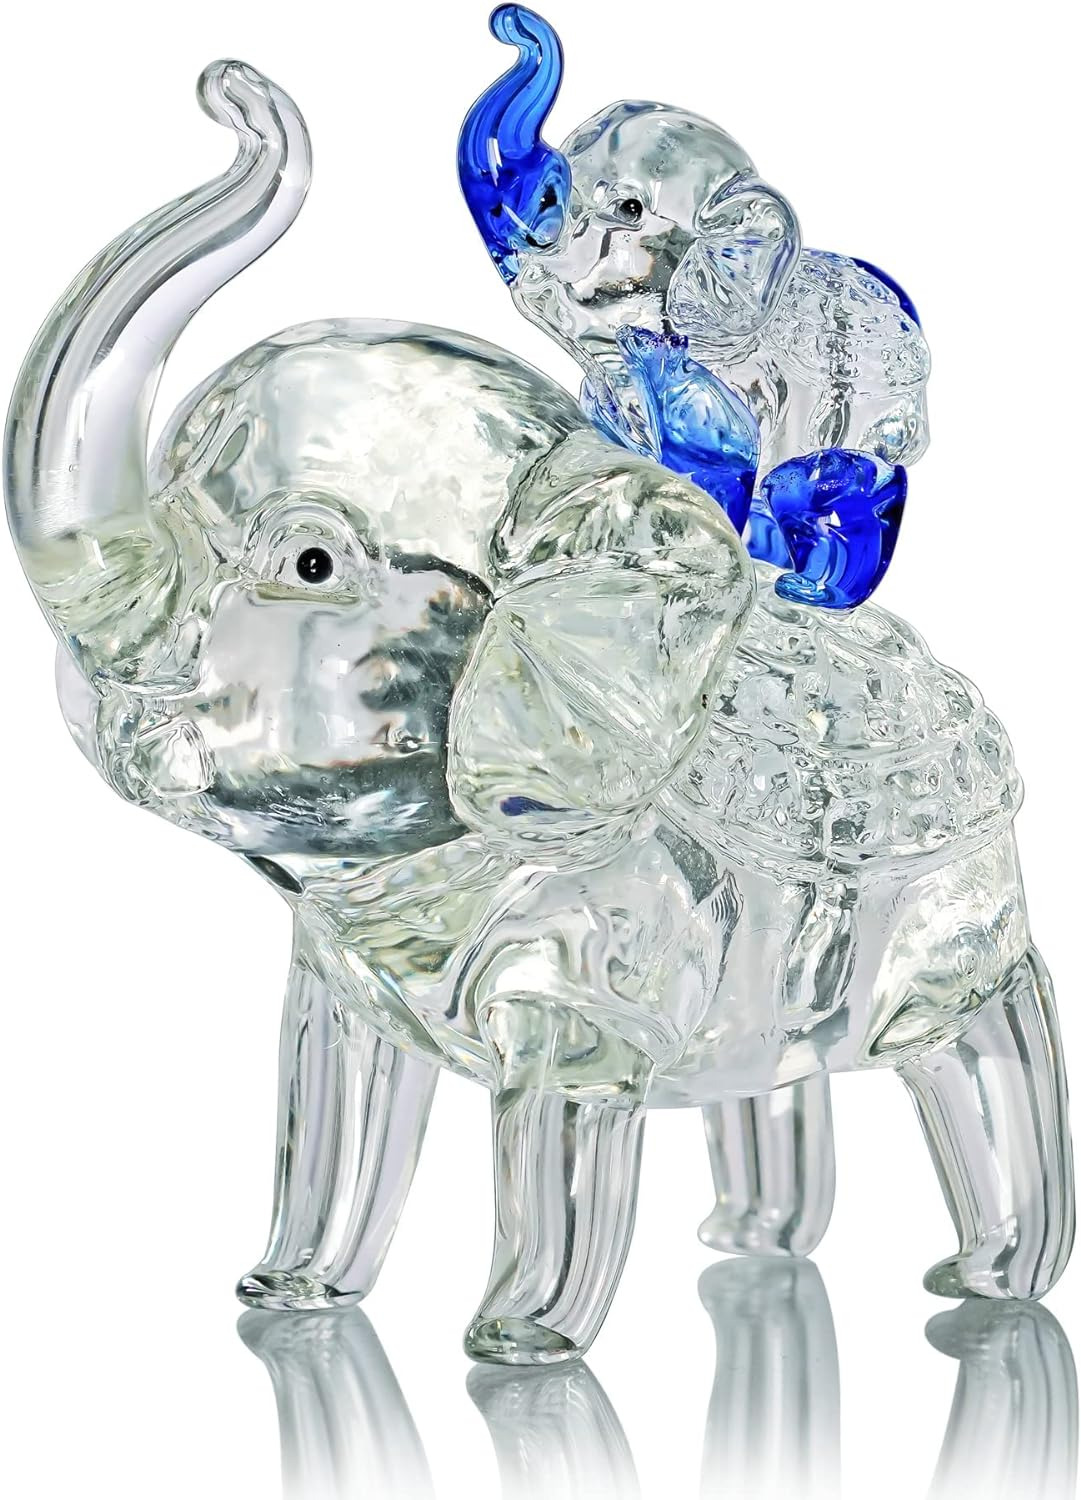 Crystal Elephant Figurines Mother Son Glass Elephants with Trunk up Crystal Anim